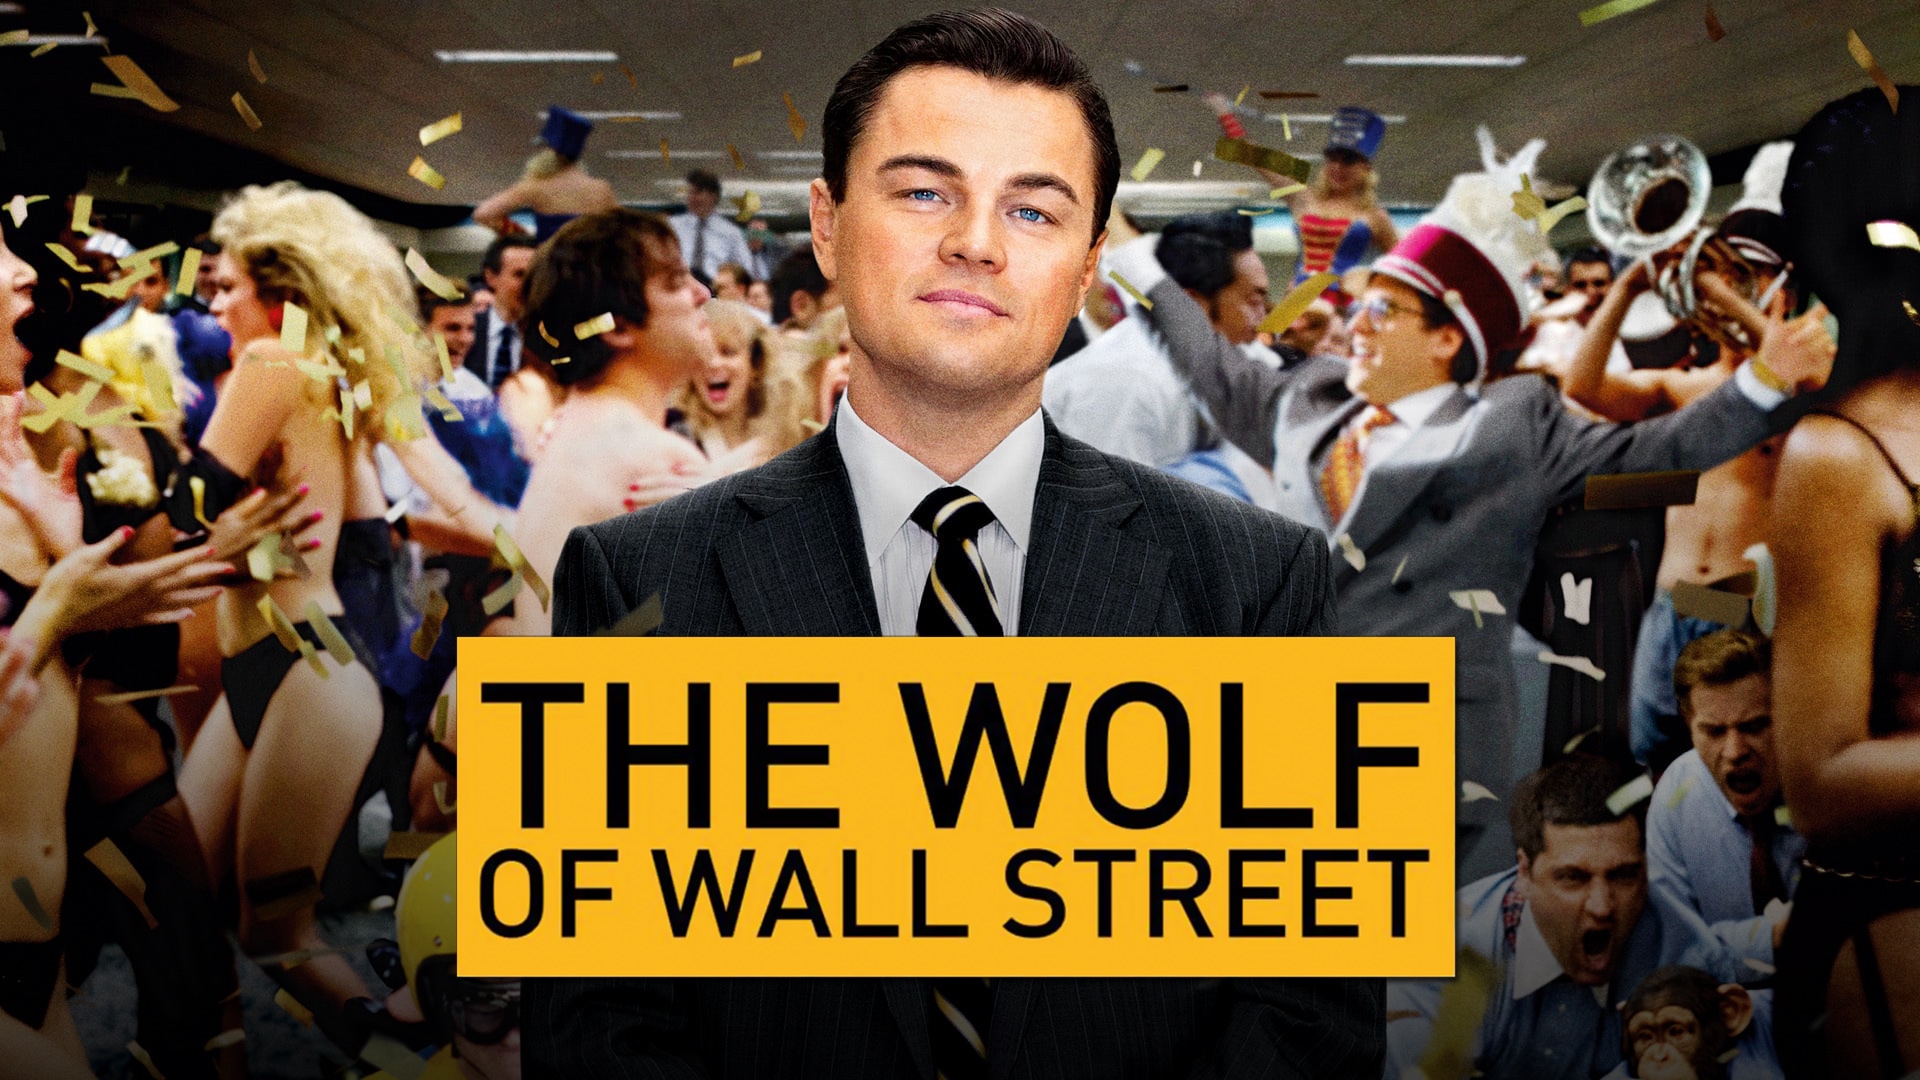 Wolf of wall street bj